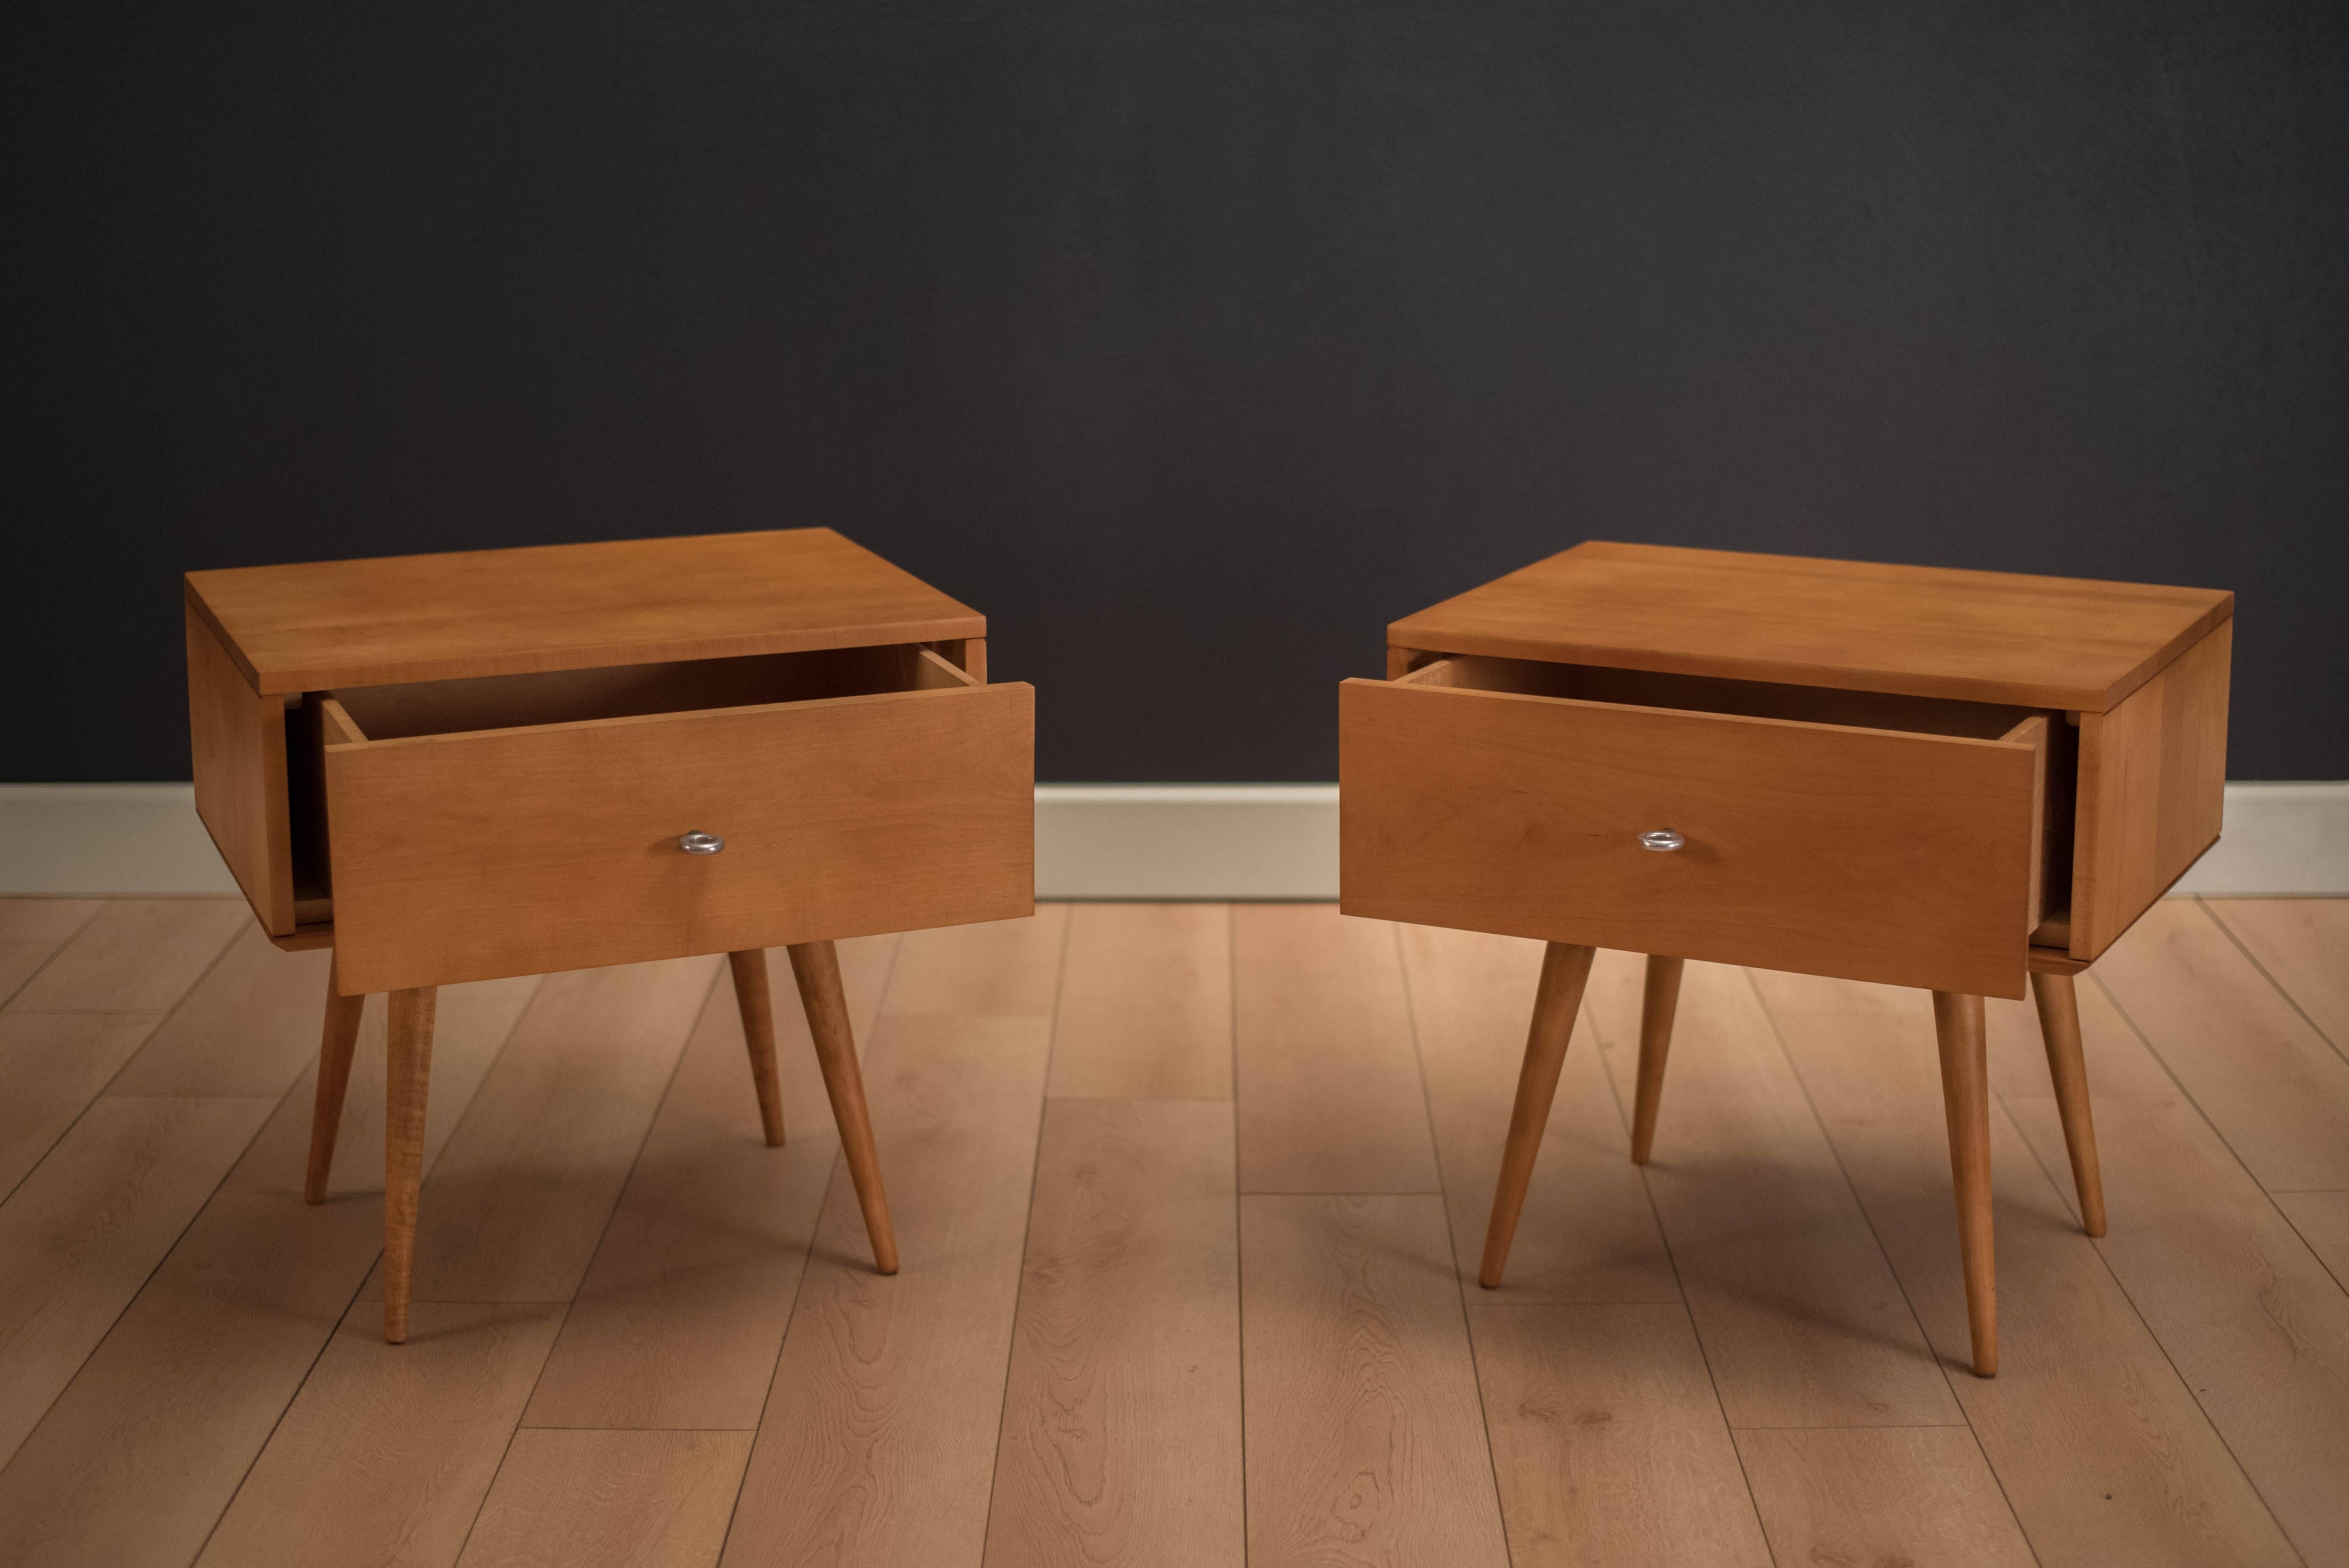 Mid-Century pair of Planner Group nightstands or bedside tables designed by Paul McCobb for Winchedon Furniture. This set is made of solid wood and accessorized with McCobb's signature aluminum pulls. Includes two side tables and two modular